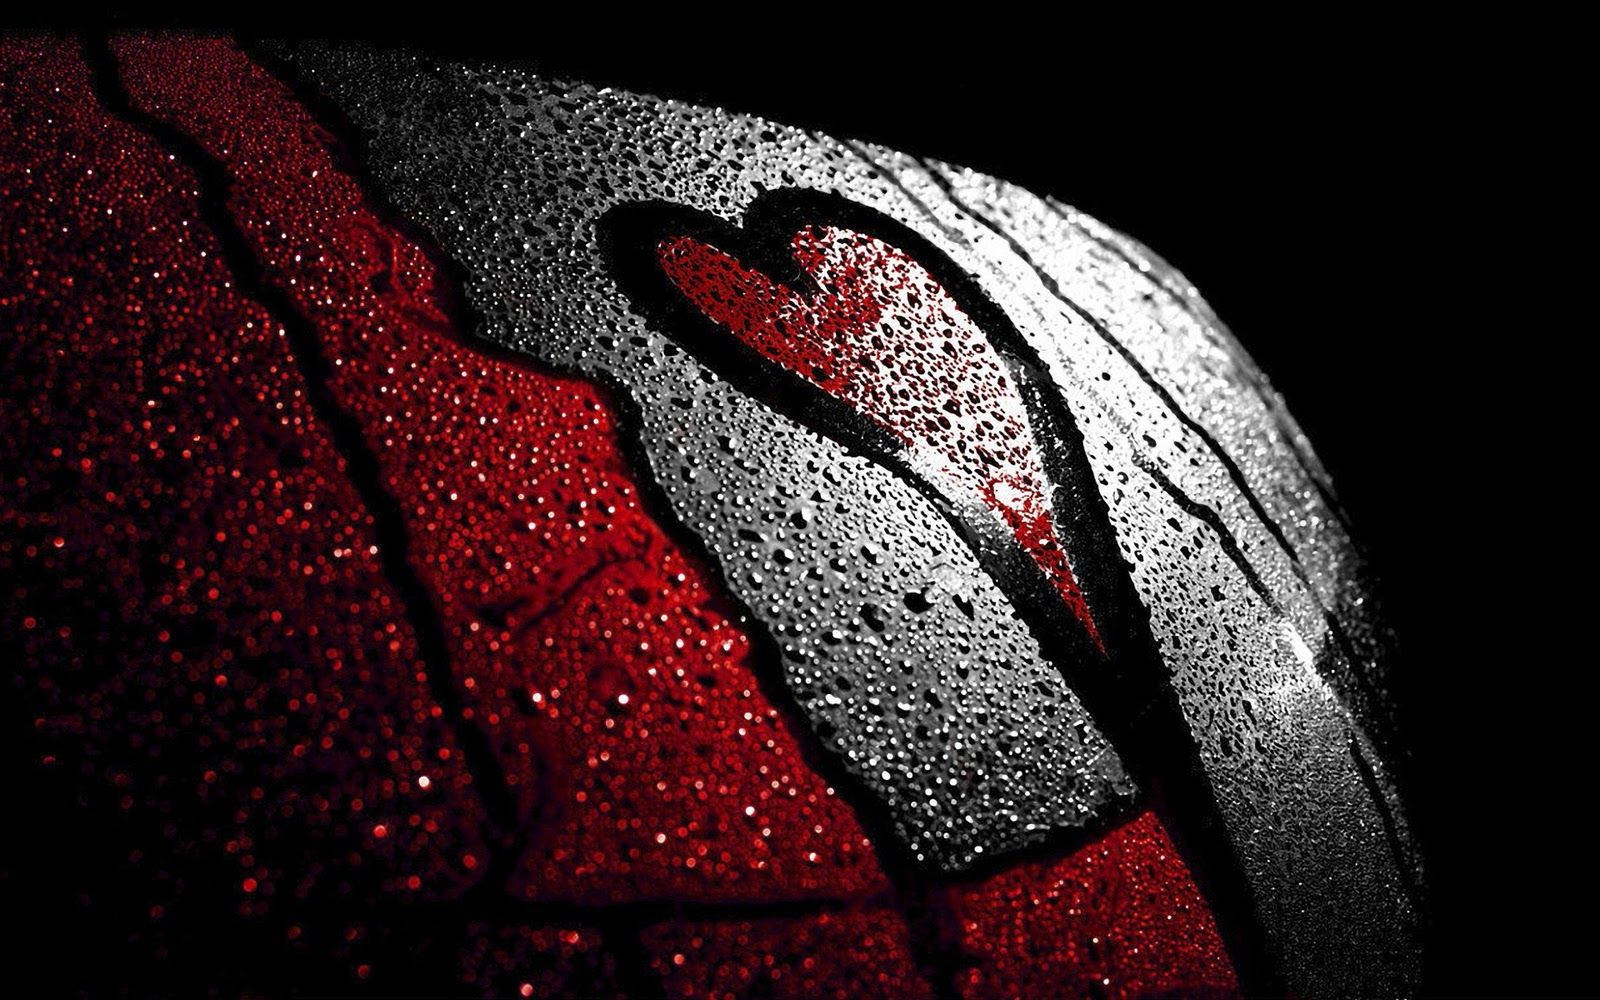 Cool HD wallpaper of close-up of red heart design with water droplets.  